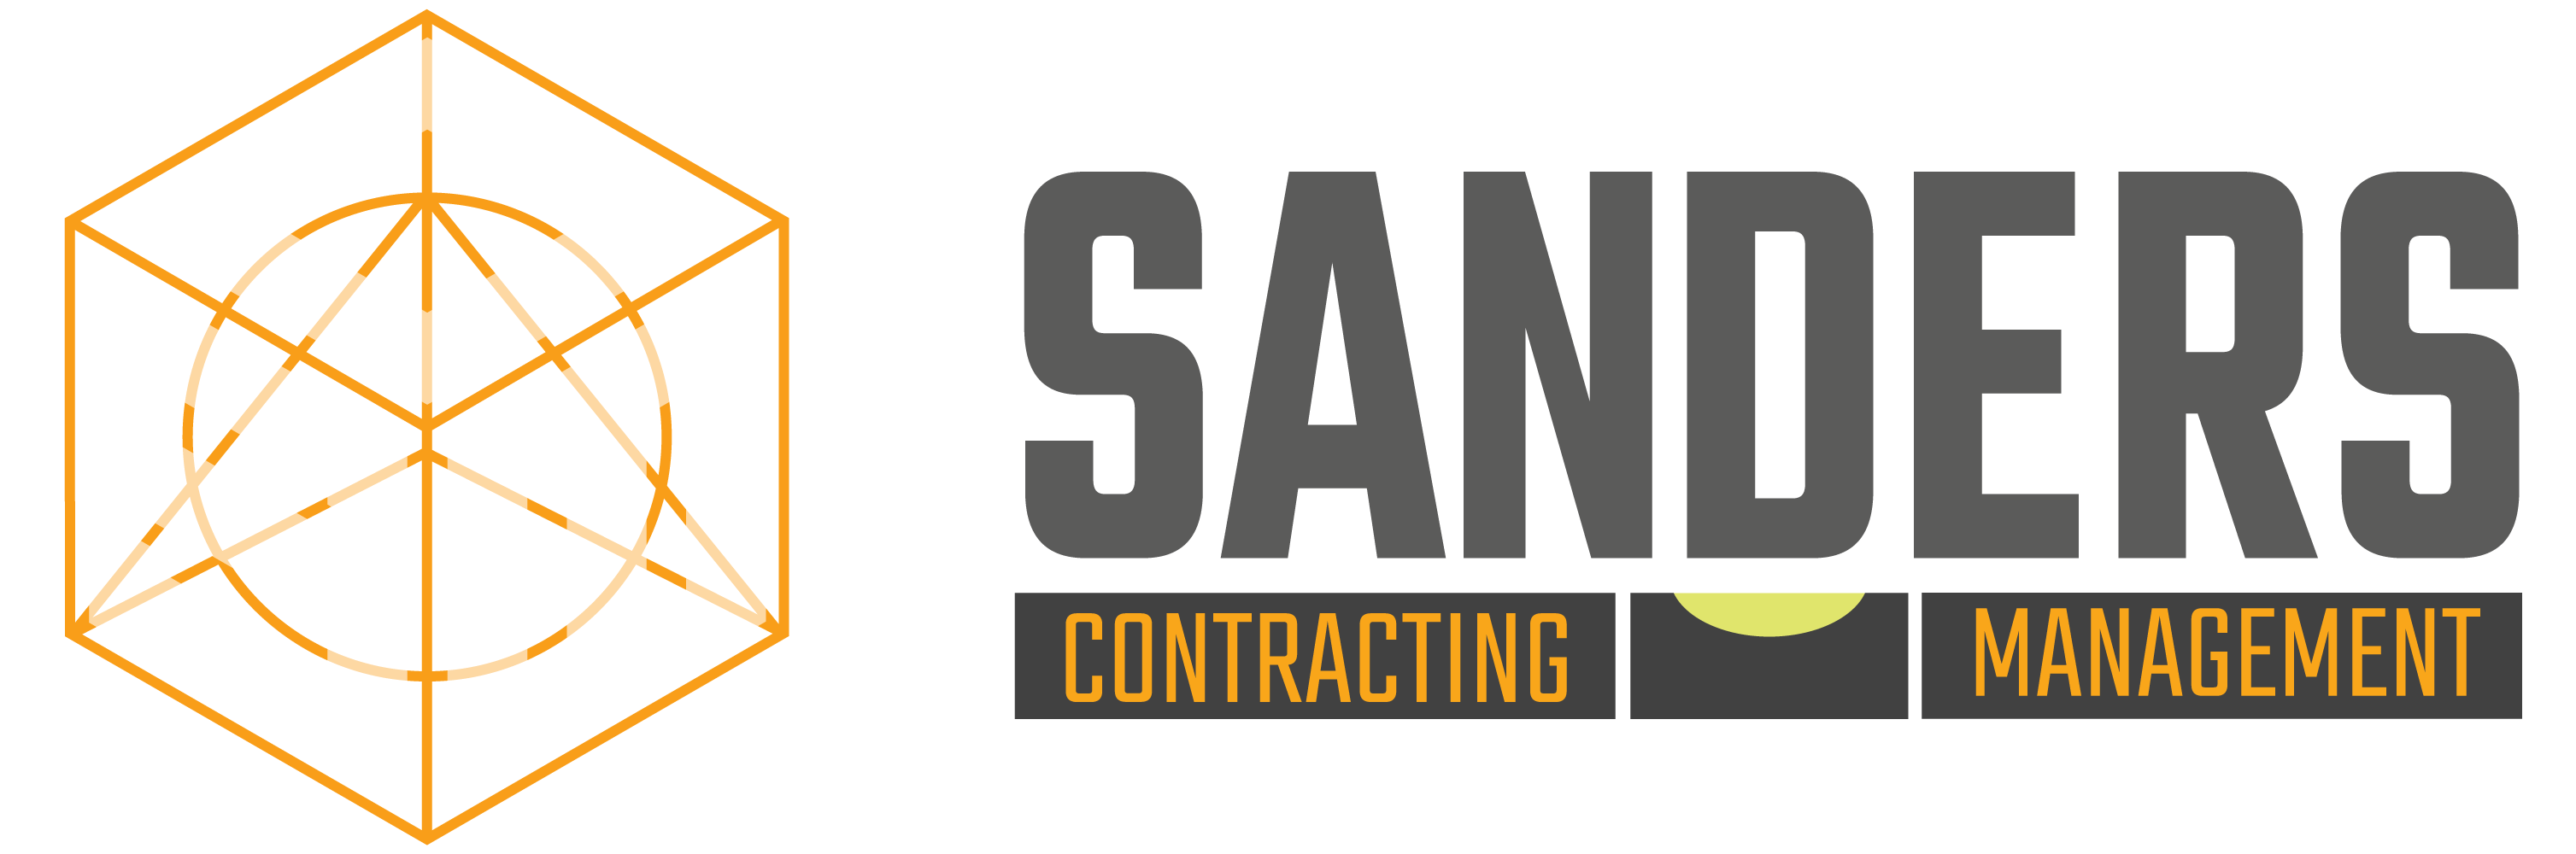 Sanders Commercial Construction Contracting and Management